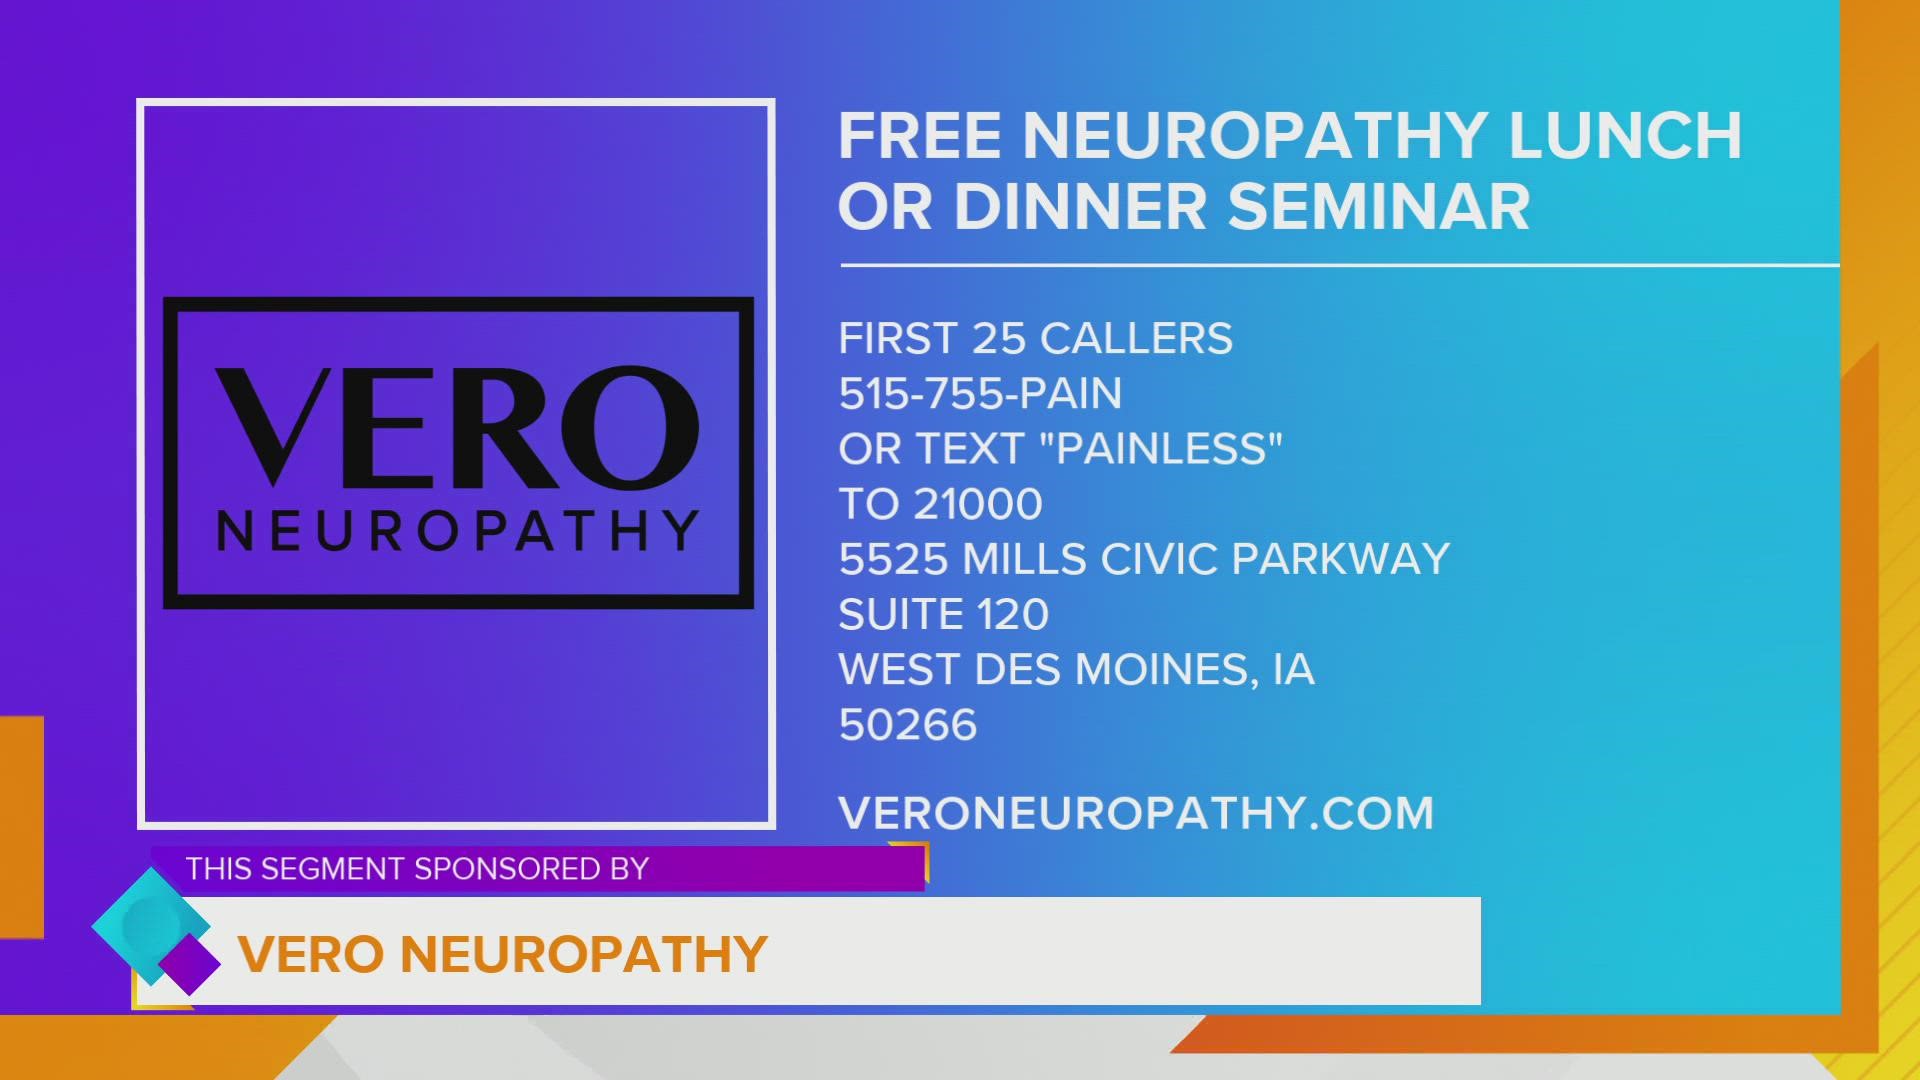 Dr. Josiah Fitzsimmons, Vero Neuropathy, talks about their NEW Lunch or Dinner Seminars that will help explain how they can treat your chronic pain | Paid Content